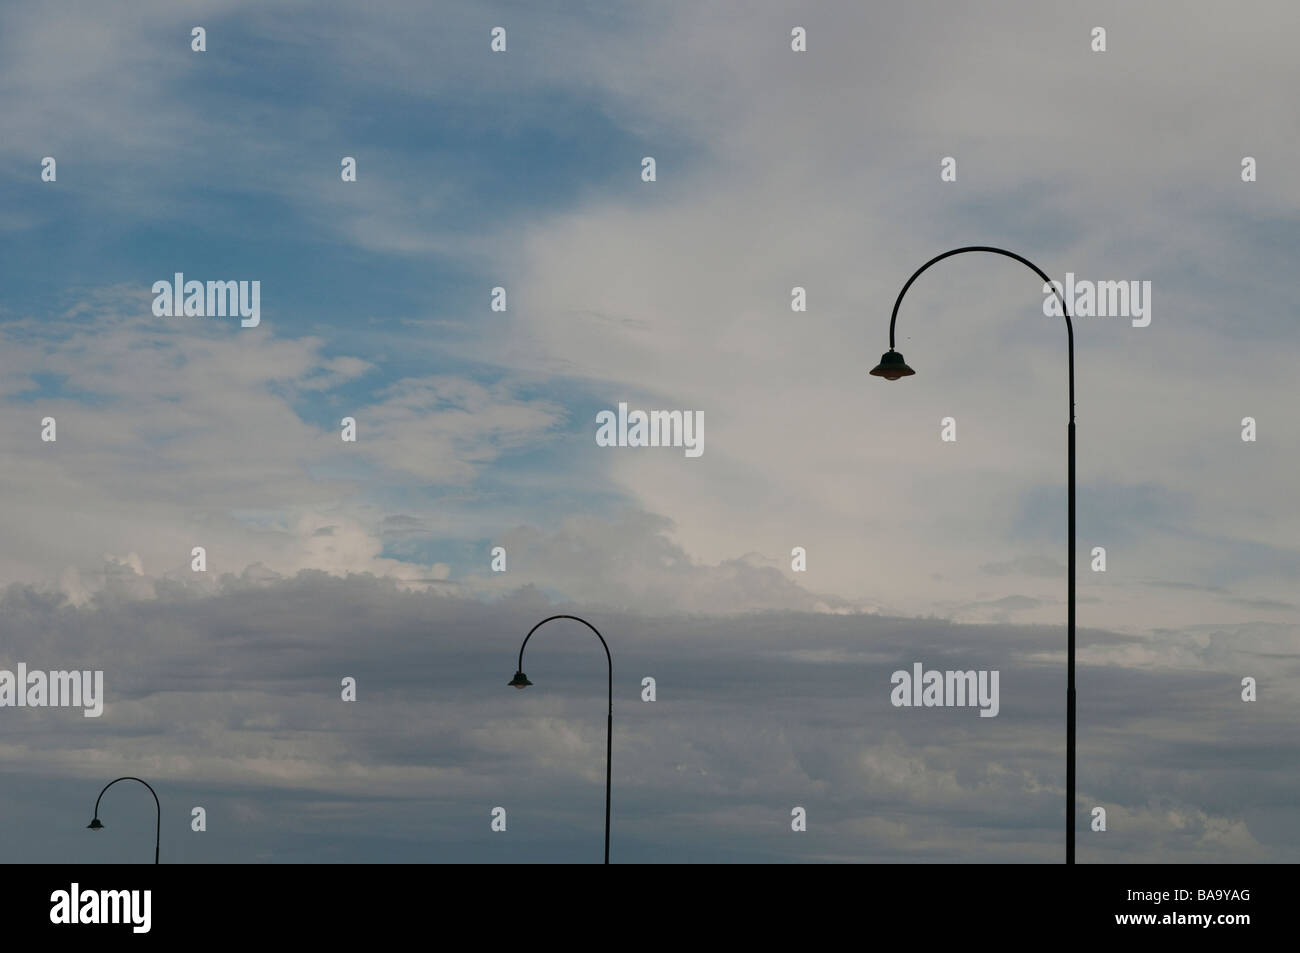 Three lampposts against the cloudy sky Stock Photo